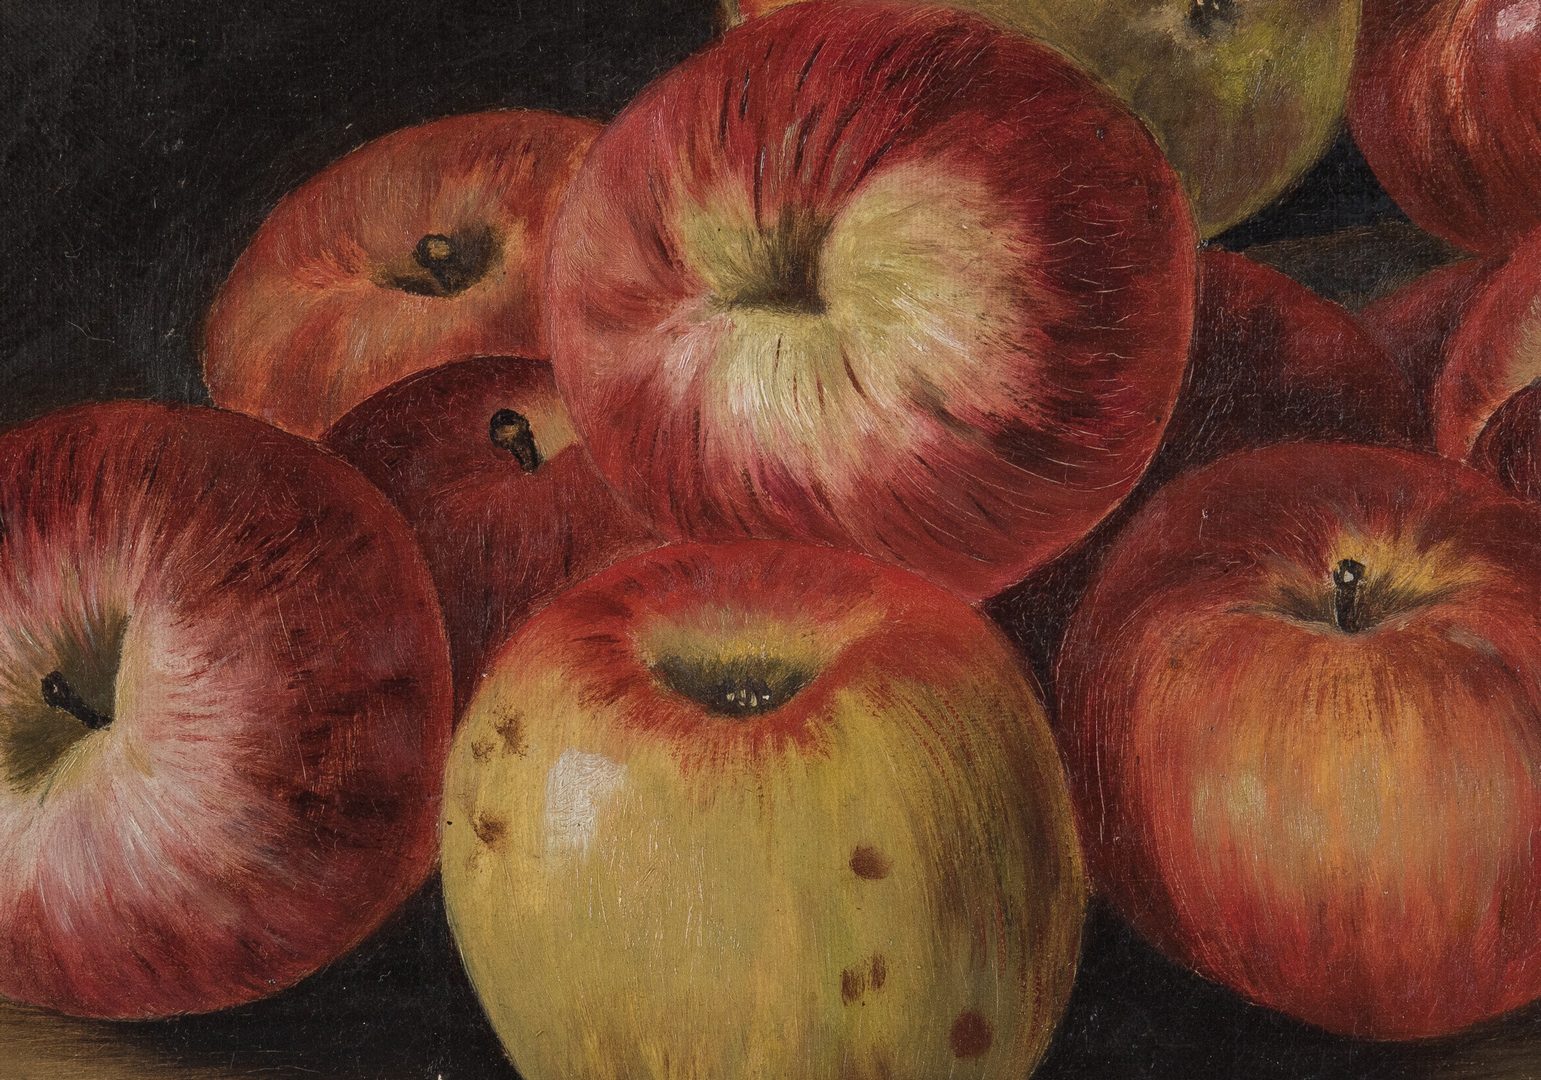 Lot 372: Still Life with Apples O/C, signed Ewing